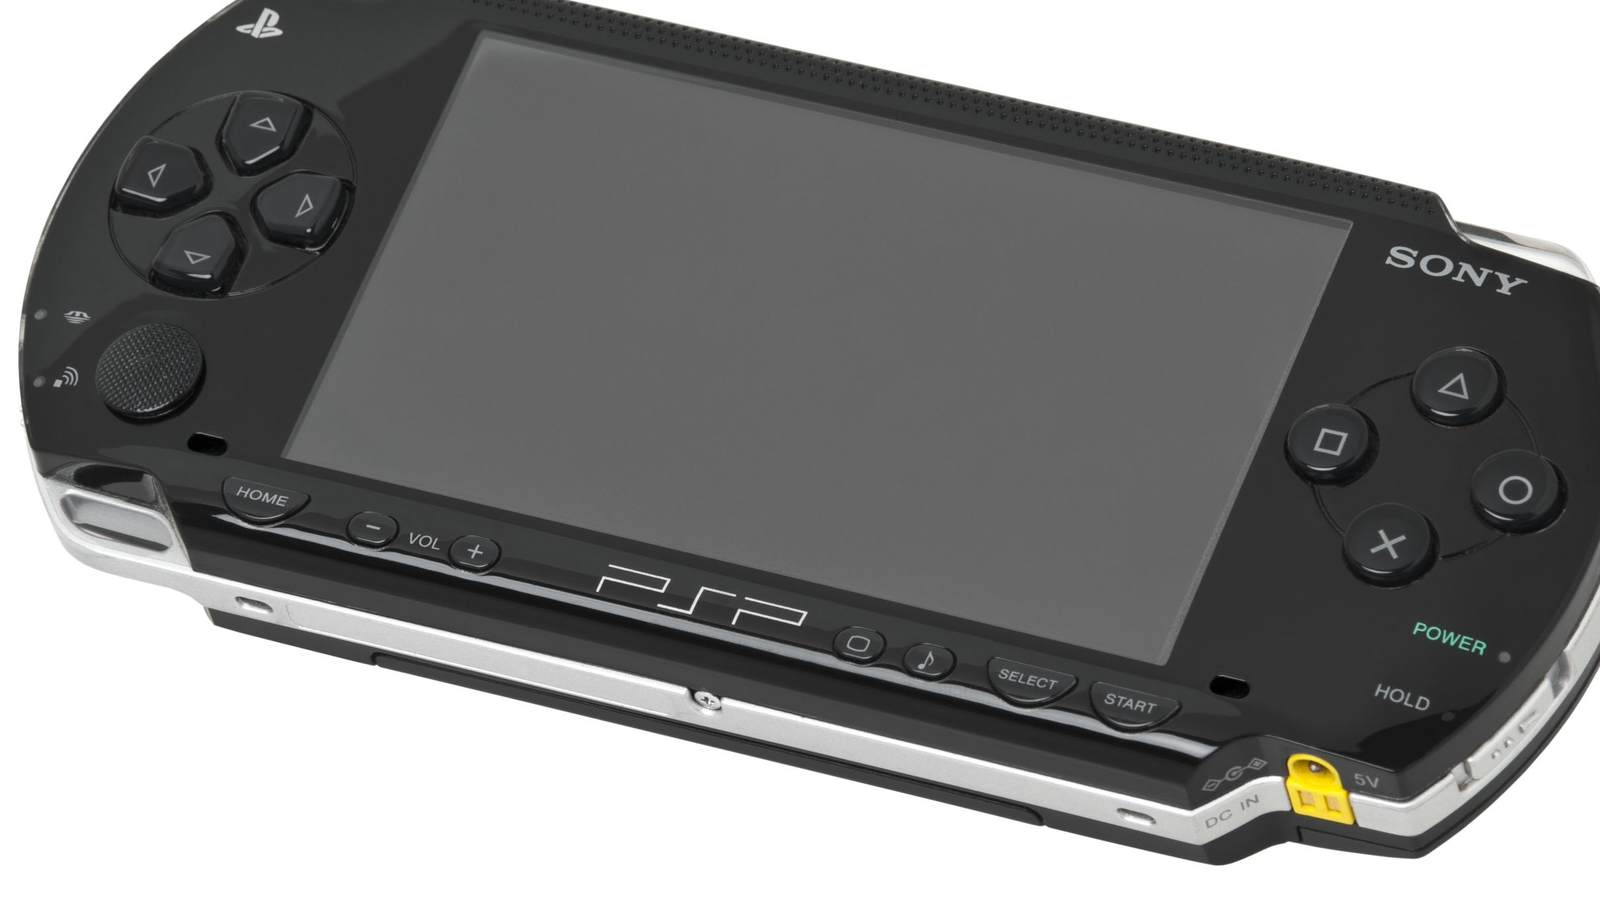 Sony will keep selling PSP games on PS3 and PS Vita stores